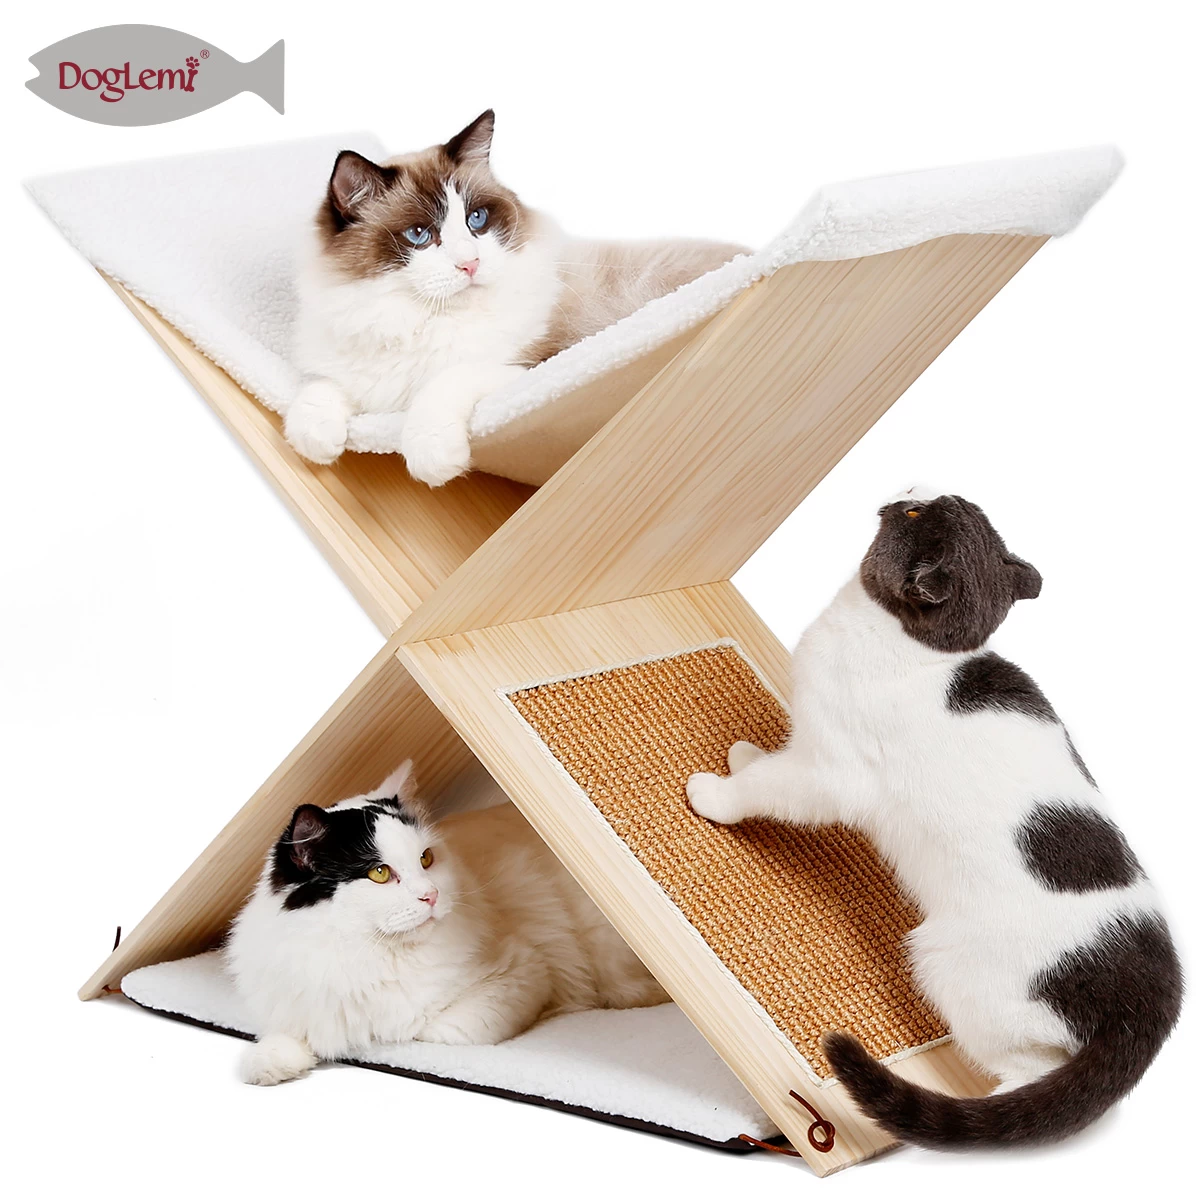 X-shaped cat stand